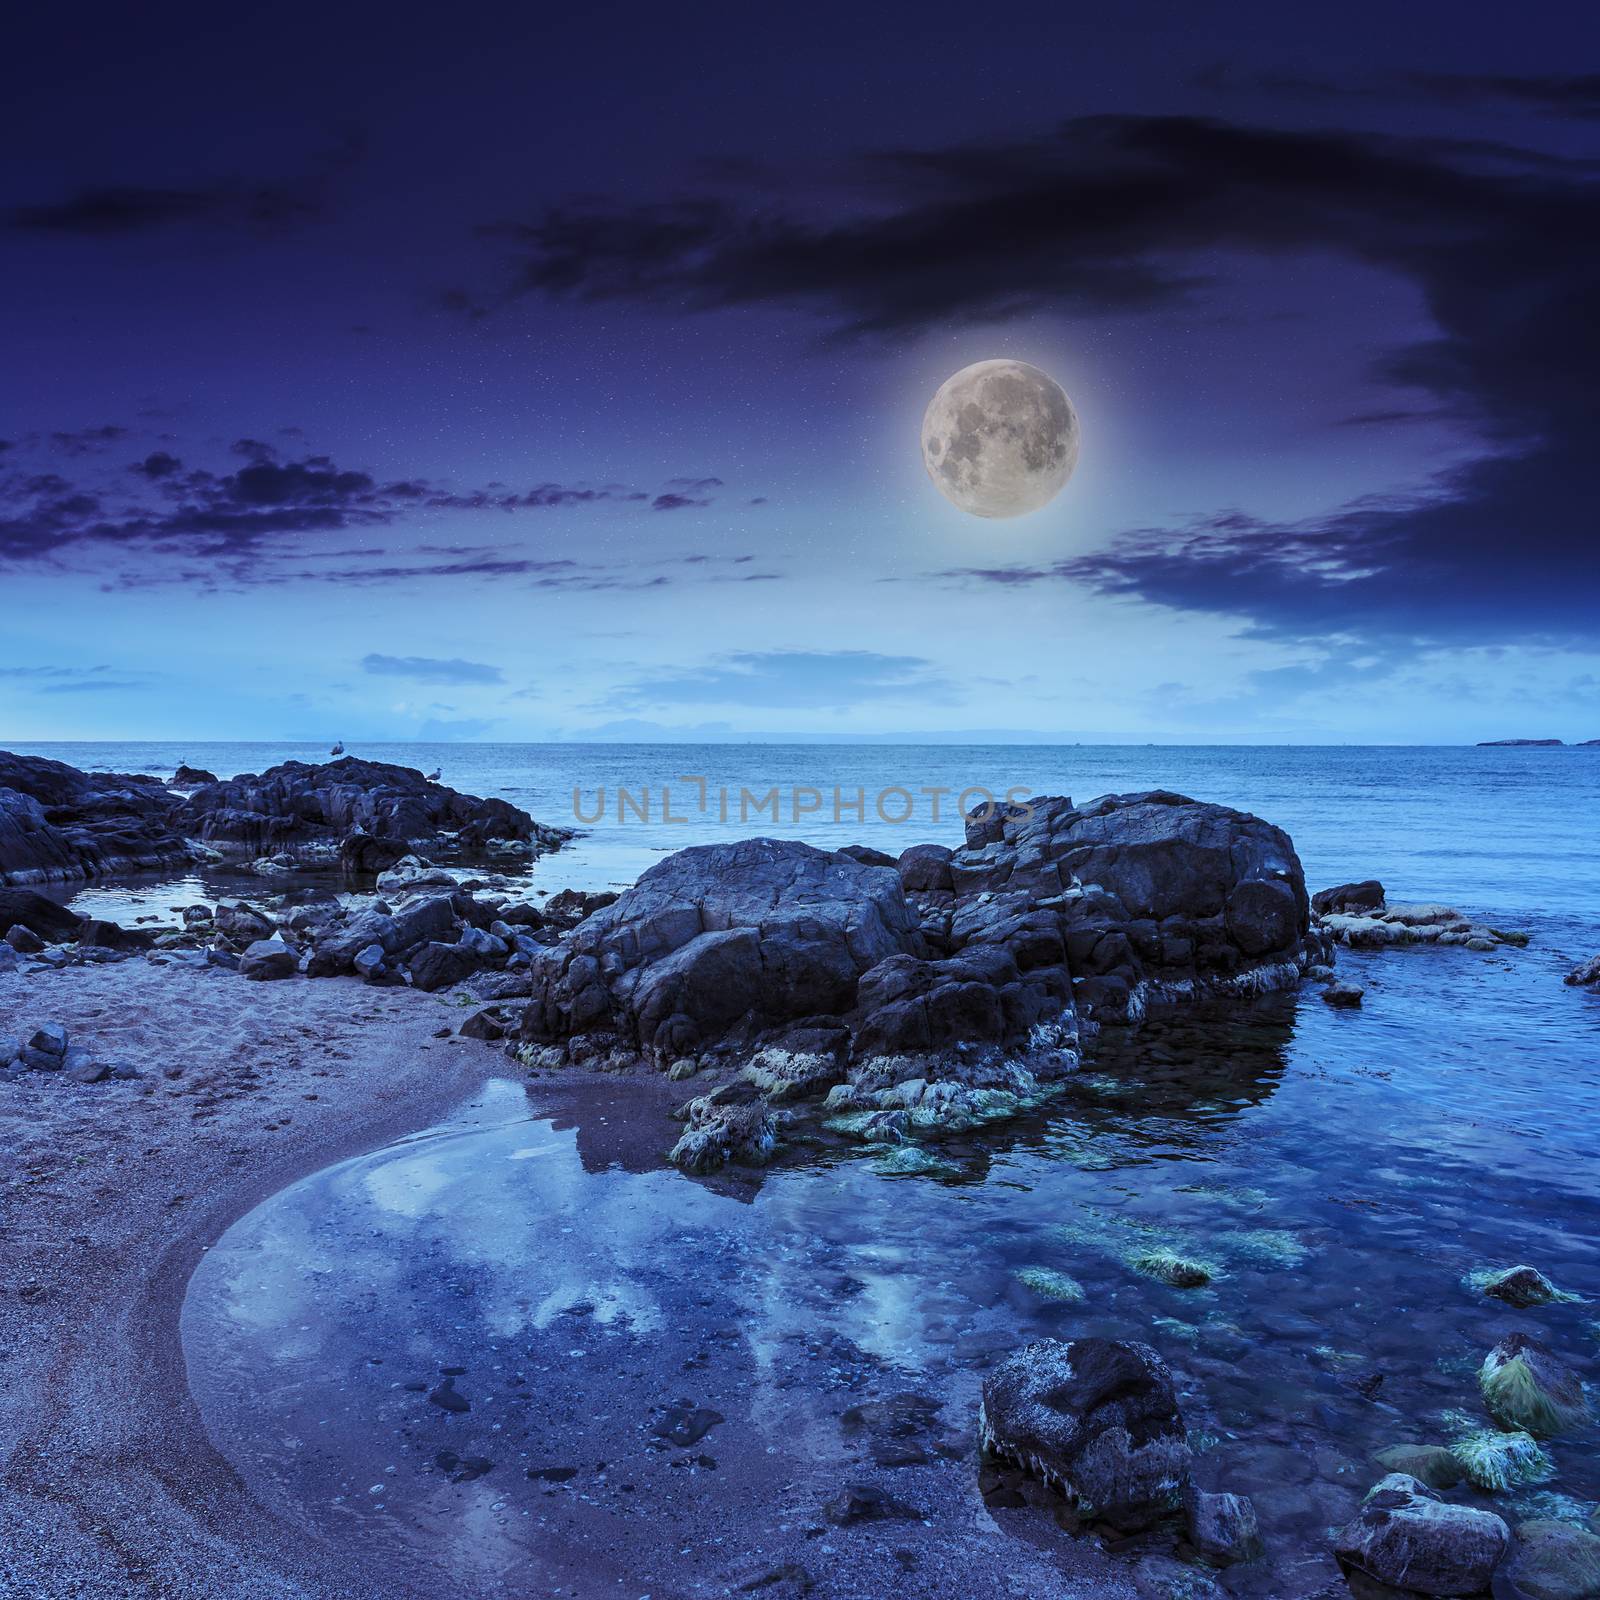 sea shore landscape with boulders sand and seaweed at night in moon light